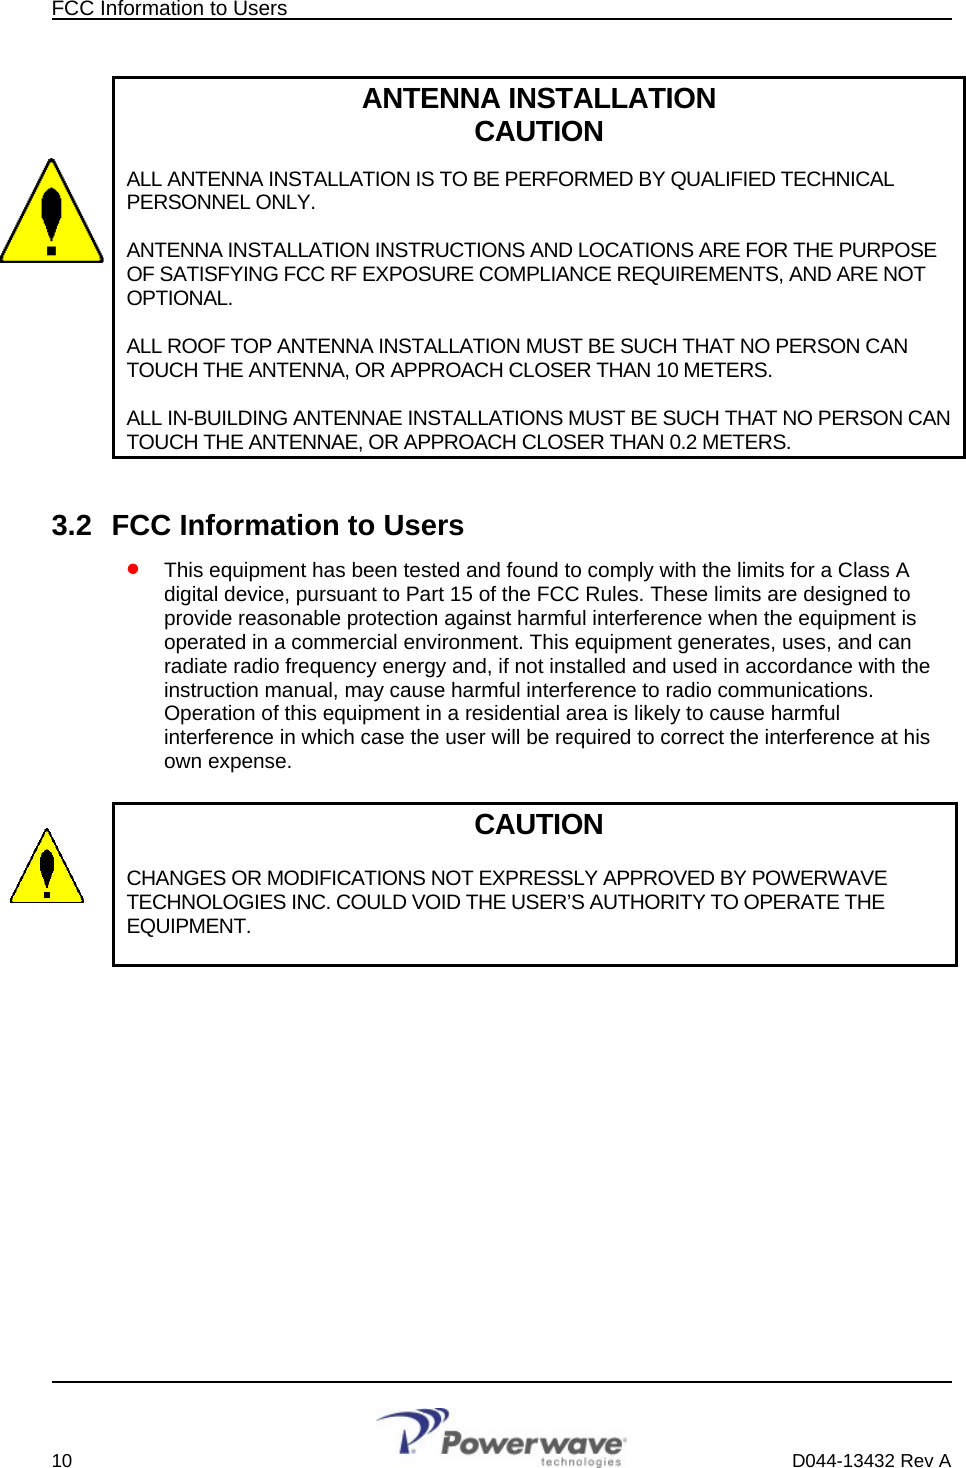 FCC Information to Users        ANTENNA INSTALLATION CAUTION  ALL ANTENNA INSTALLATION IS TO BE PERFORMED BY QUALIFIED TECHNICAL PERSONNEL ONLY.   ANTENNA INSTALLATION INSTRUCTIONS AND LOCATIONS ARE FOR THE PURPOSE OF SATISFYING FCC RF EXPOSURE COMPLIANCE REQUIREMENTS, AND ARE NOT OPTIONAL.  ALL ROOF TOP ANTENNA INSTALLATION MUST BE SUCH THAT NO PERSON CAN TOUCH THE ANTENNA, OR APPROACH CLOSER THAN 10 METERS.  ALL IN-BUILDING ANTENNAE INSTALLATIONS MUST BE SUCH THAT NO PERSON CAN TOUCH THE ANTENNAE, OR APPROACH CLOSER THAN 0.2 METERS.  3.2  FCC Information to Users • This equipment has been tested and found to comply with the limits for a Class A digital device, pursuant to Part 15 of the FCC Rules. These limits are designed to provide reasonable protection against harmful interference when the equipment is operated in a commercial environment. This equipment generates, uses, and can radiate radio frequency energy and, if not installed and used in accordance with the instruction manual, may cause harmful interference to radio communications. Operation of this equipment in a residential area is likely to cause harmful interference in which case the user will be required to correct the interference at his own expense.  CAUTION  CHANGES OR MODIFICATIONS NOT EXPRESSLY APPROVED BY POWERWAVE TECHNOLOGIES INC. COULD VOID THE USER’S AUTHORITY TO OPERATE THE EQUIPMENT.            10    D044-13432 Rev A 